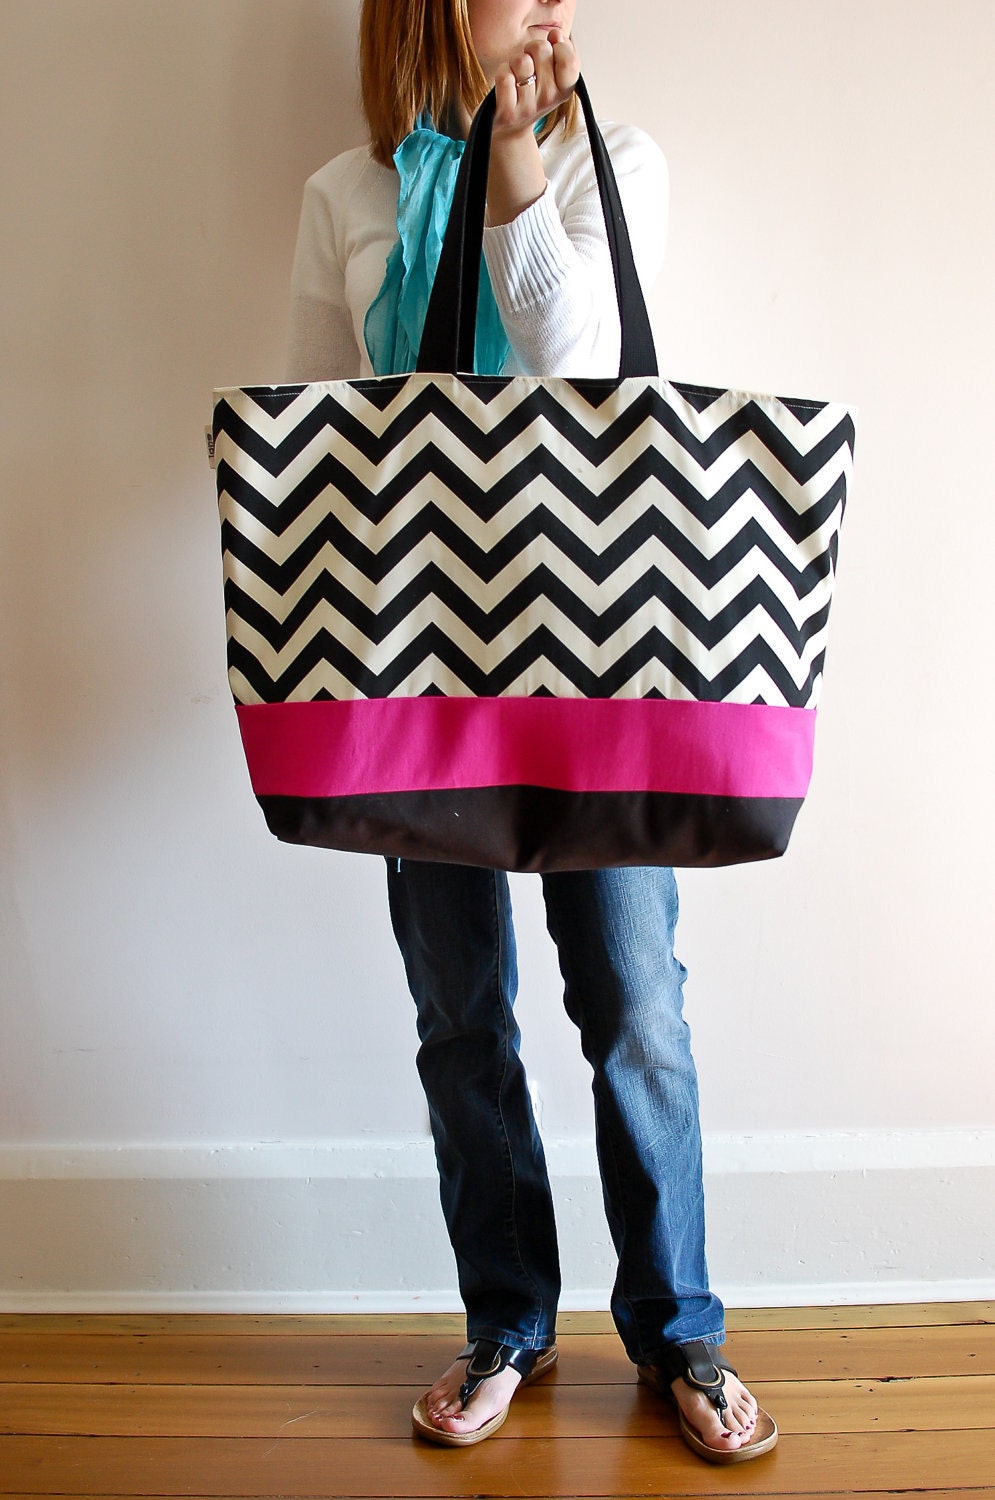 EXTRA Large Beach Bag // Tote in Black Chevron with a pinch of